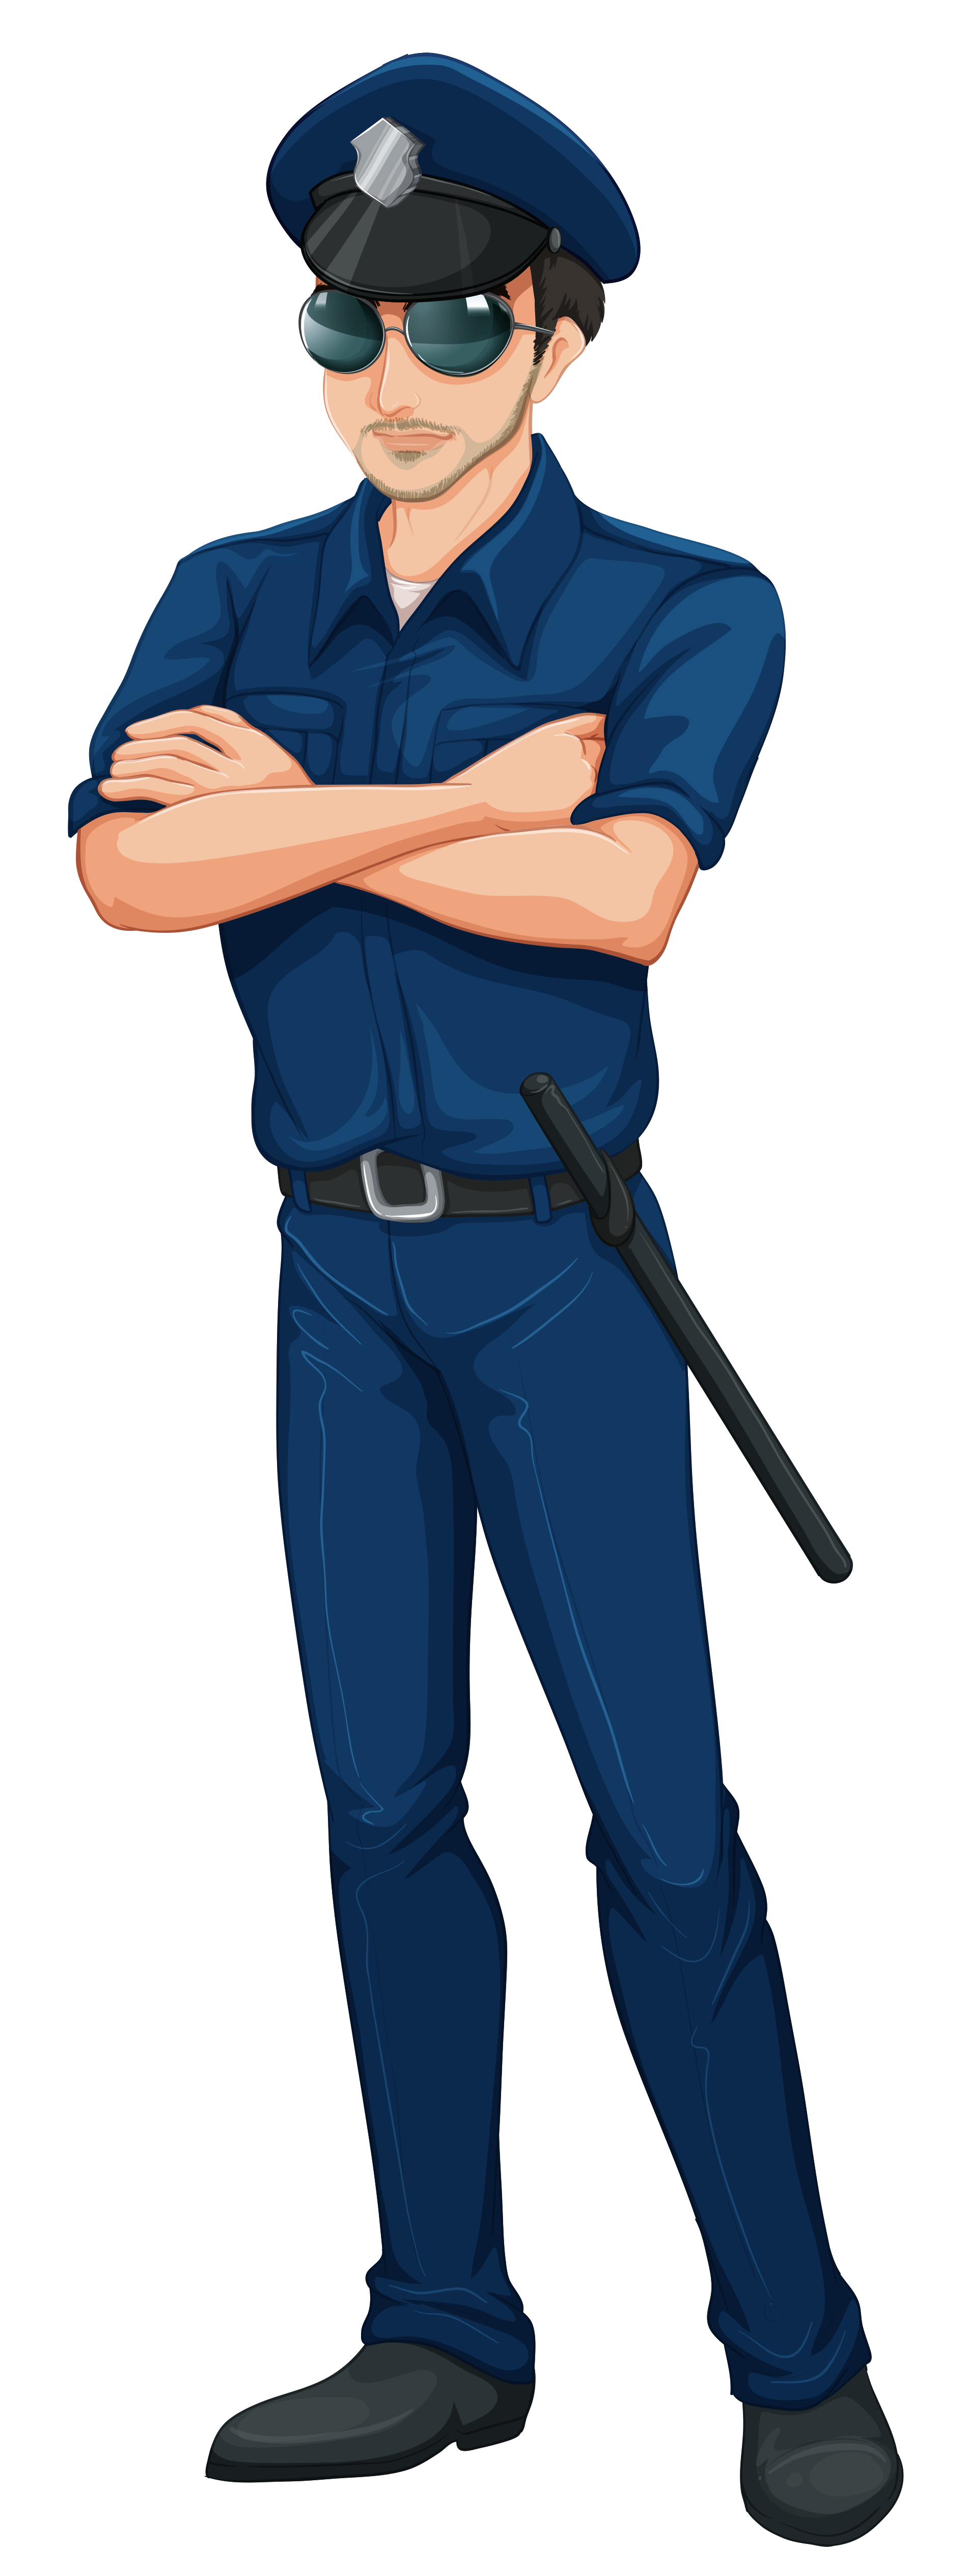 Police Officer Clipart - Free